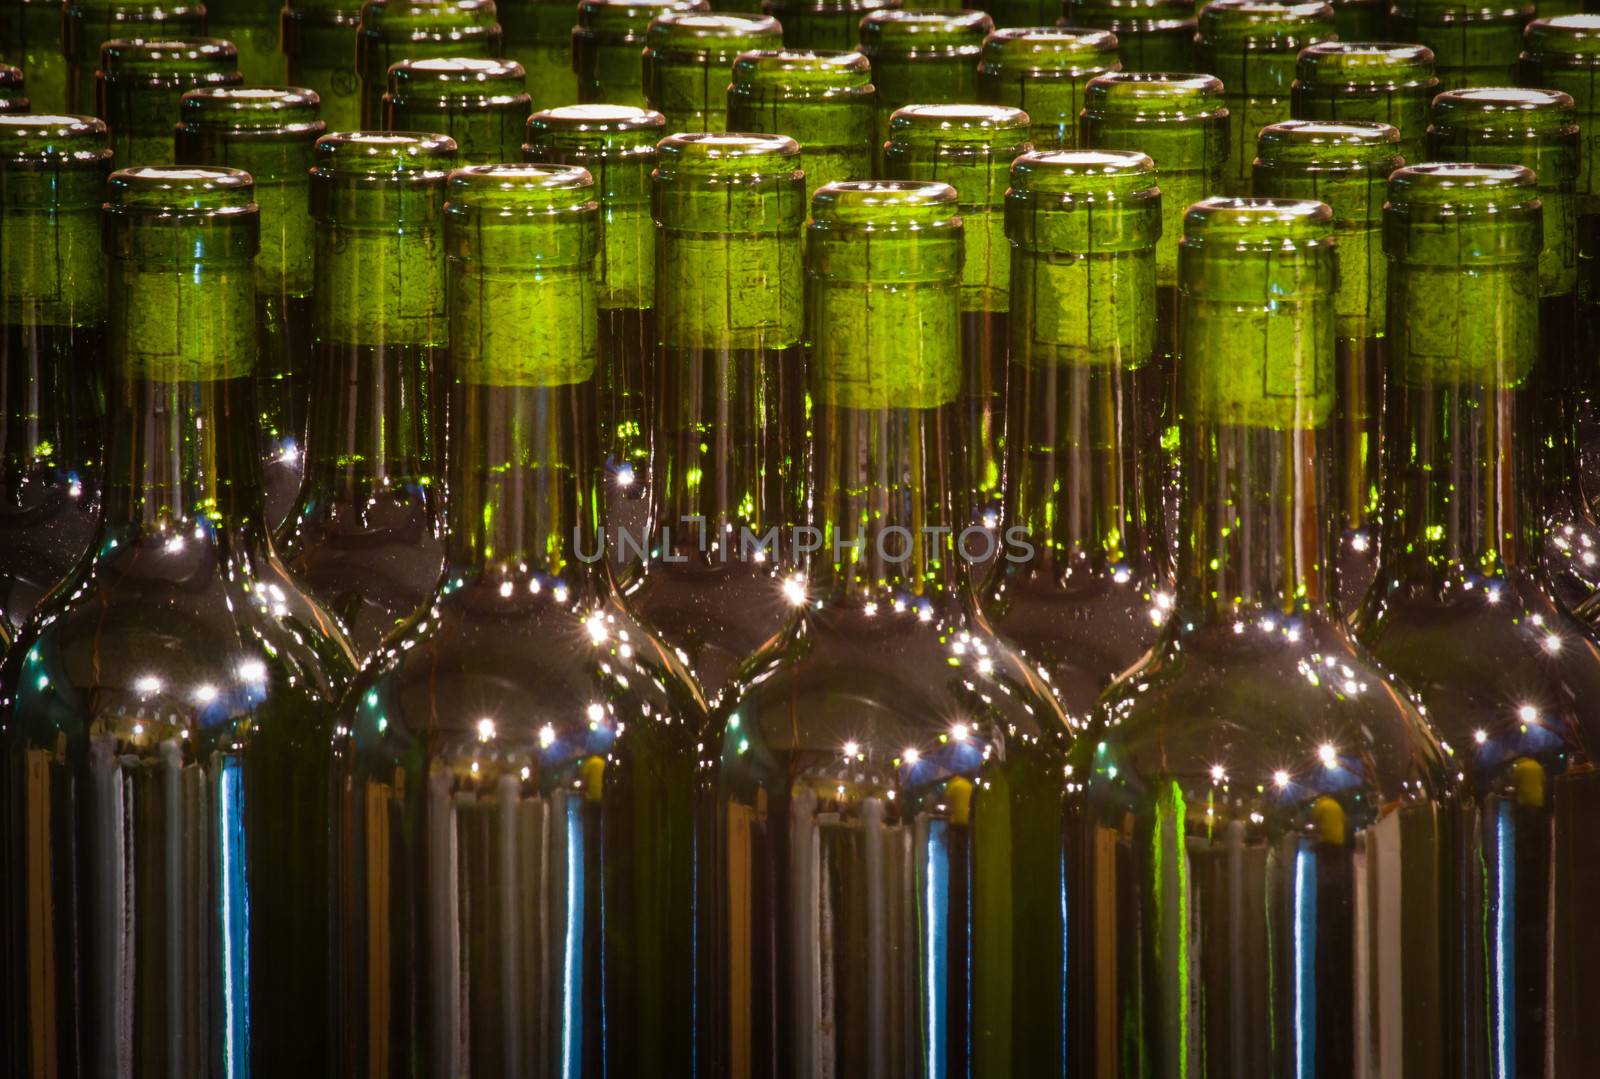 green glass bottles with cork by marco_govel